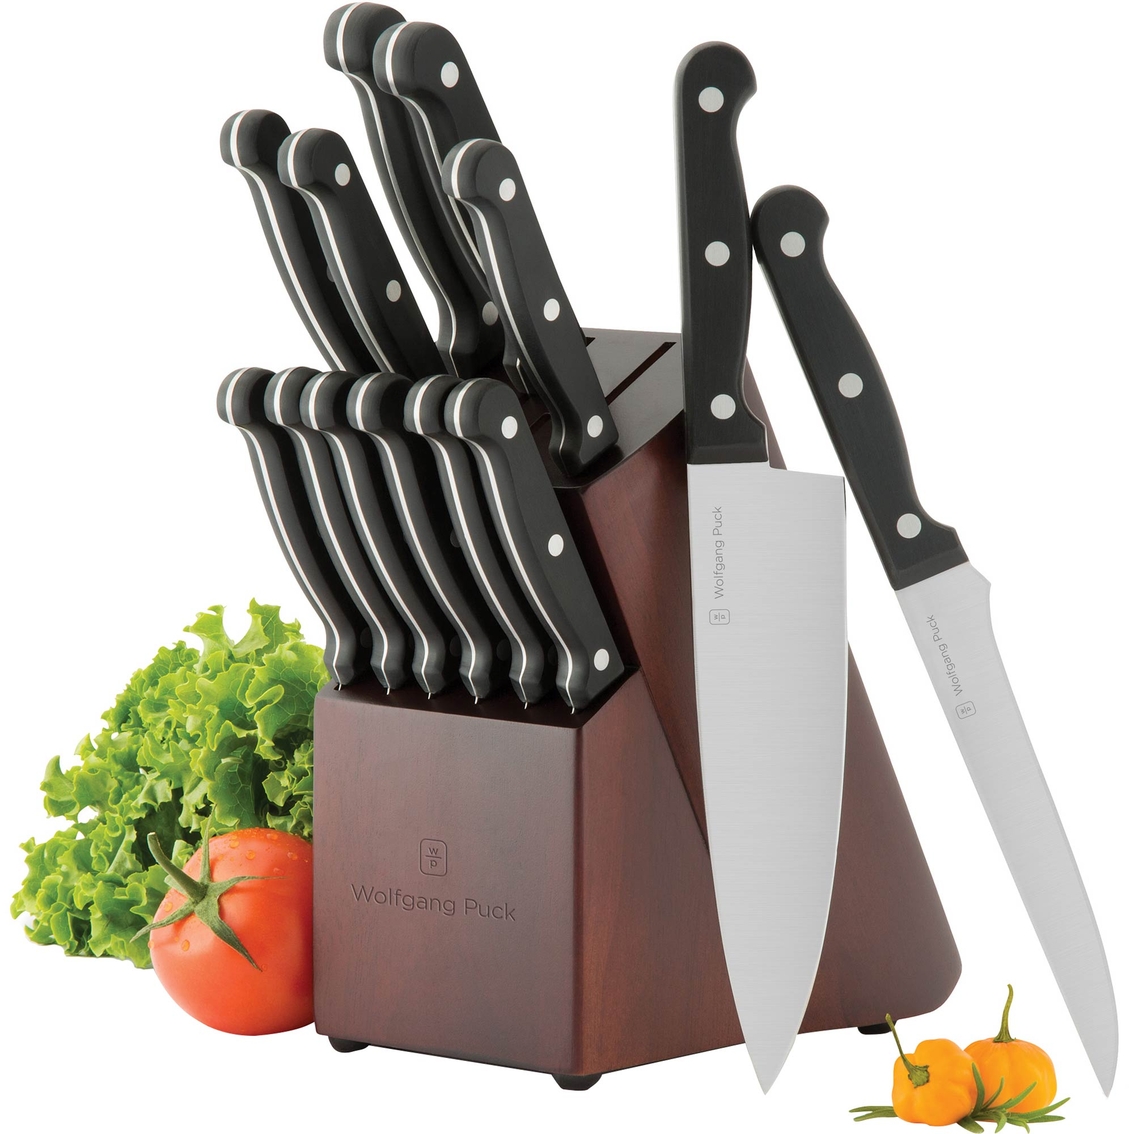 Wolfgang Puck Wolfgang Puck 14-Piece Cookware Set in the Cooking